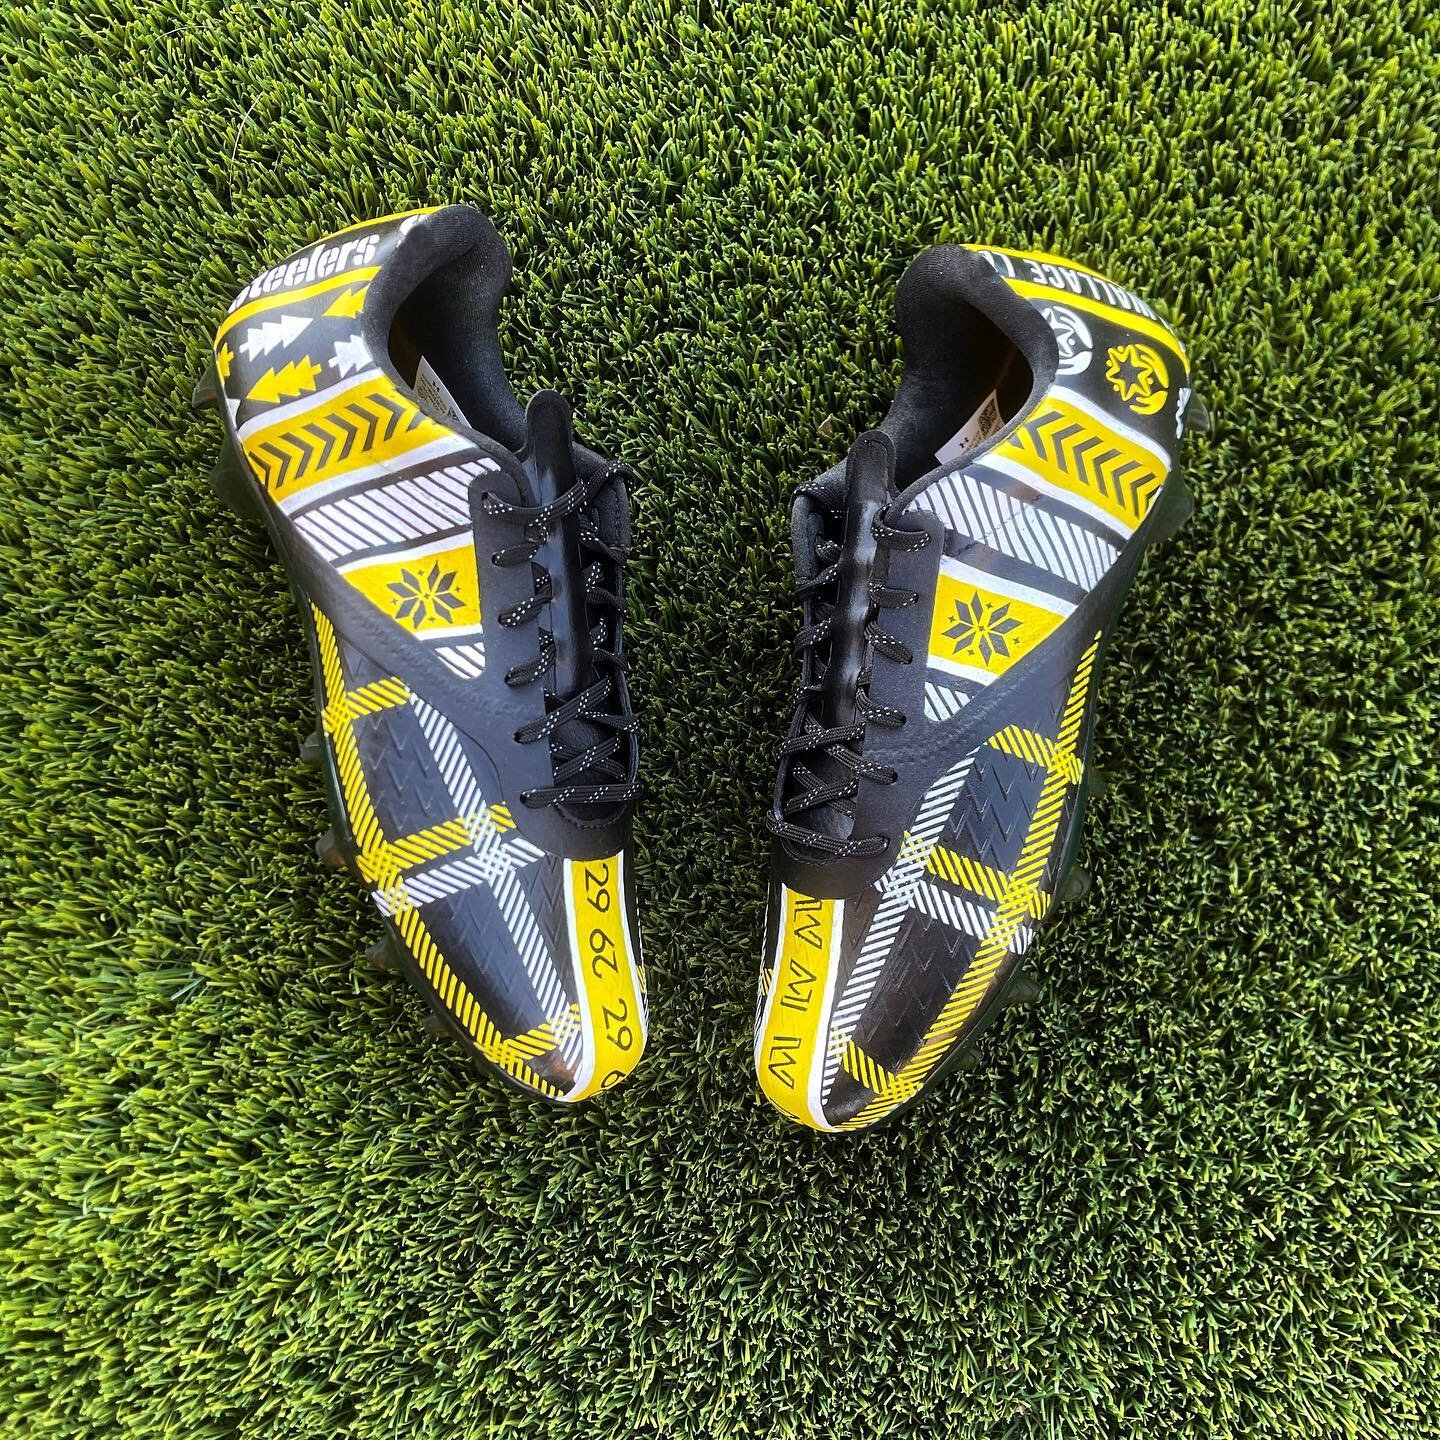 Doing my yearly dusting off of the airbrush for My Cause My Cleats week, featuring a new team!

@_primetime39 of the @steelers (#29) will be wearing these Ugly Christmas Sweater themed cleats this weekend 12/4 against the Atlanta Falcons.

Levi will 